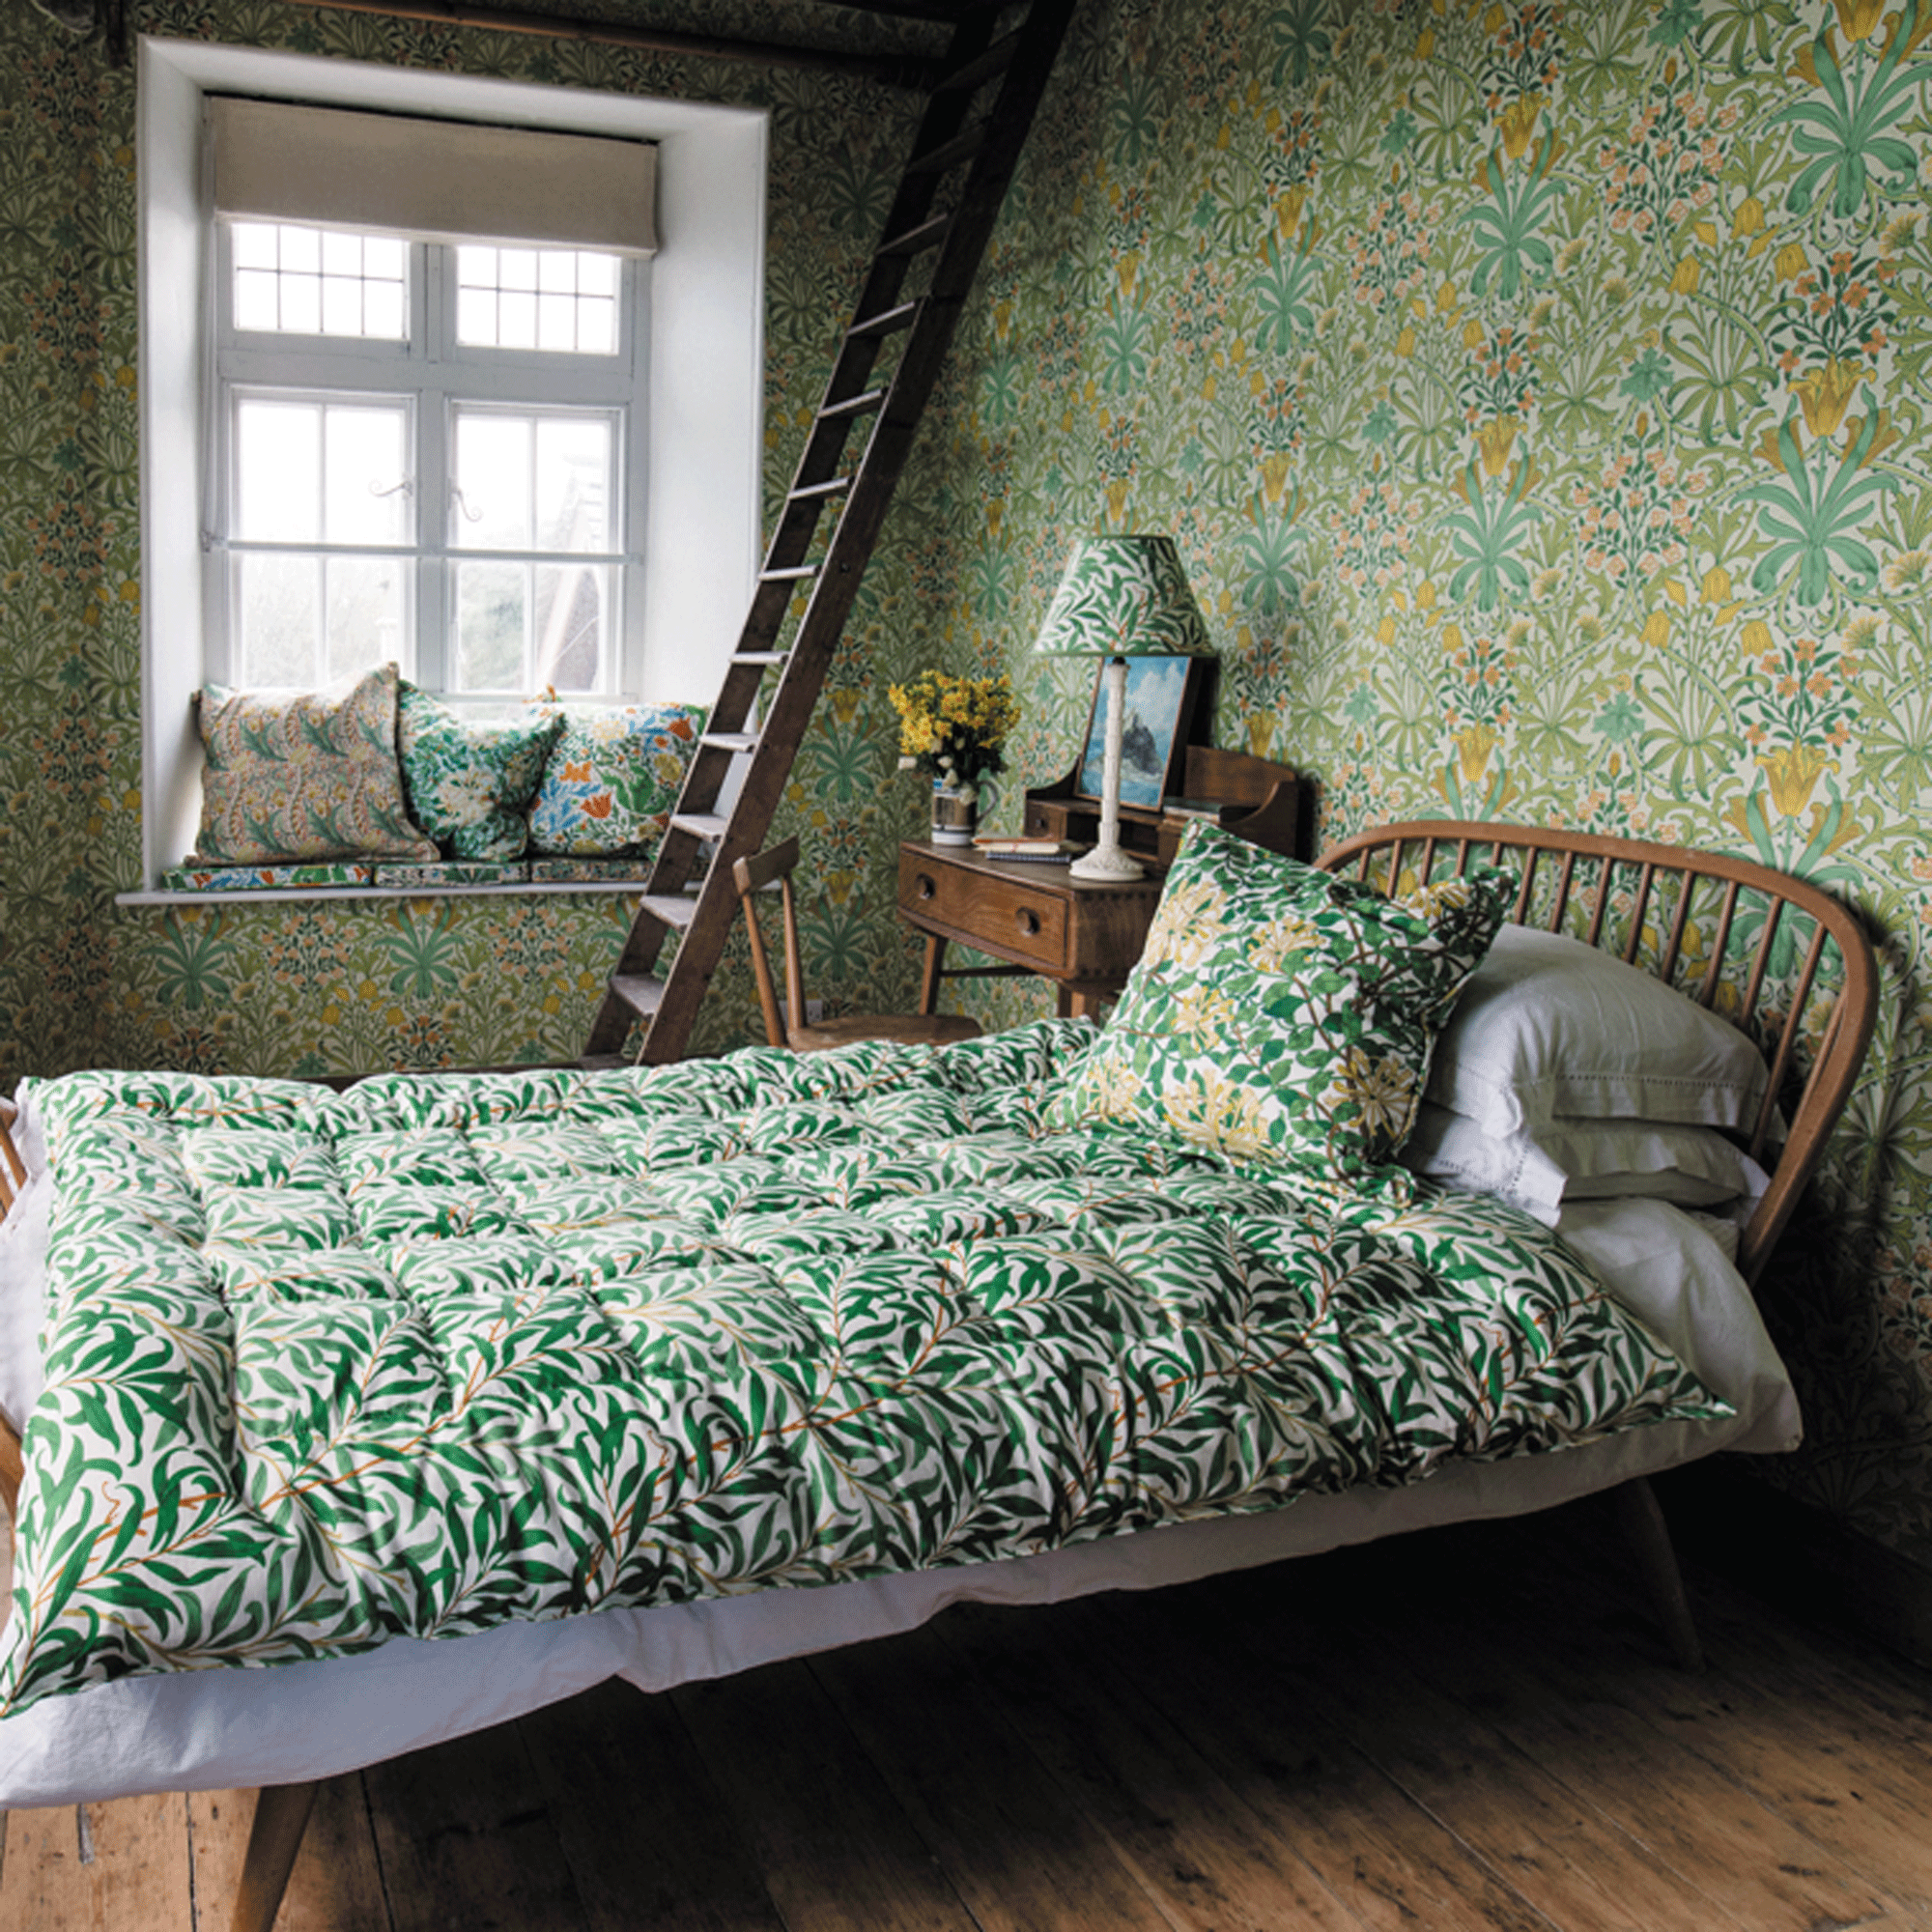 Bedroom with patterned wallpaper, bedding and. lampshade